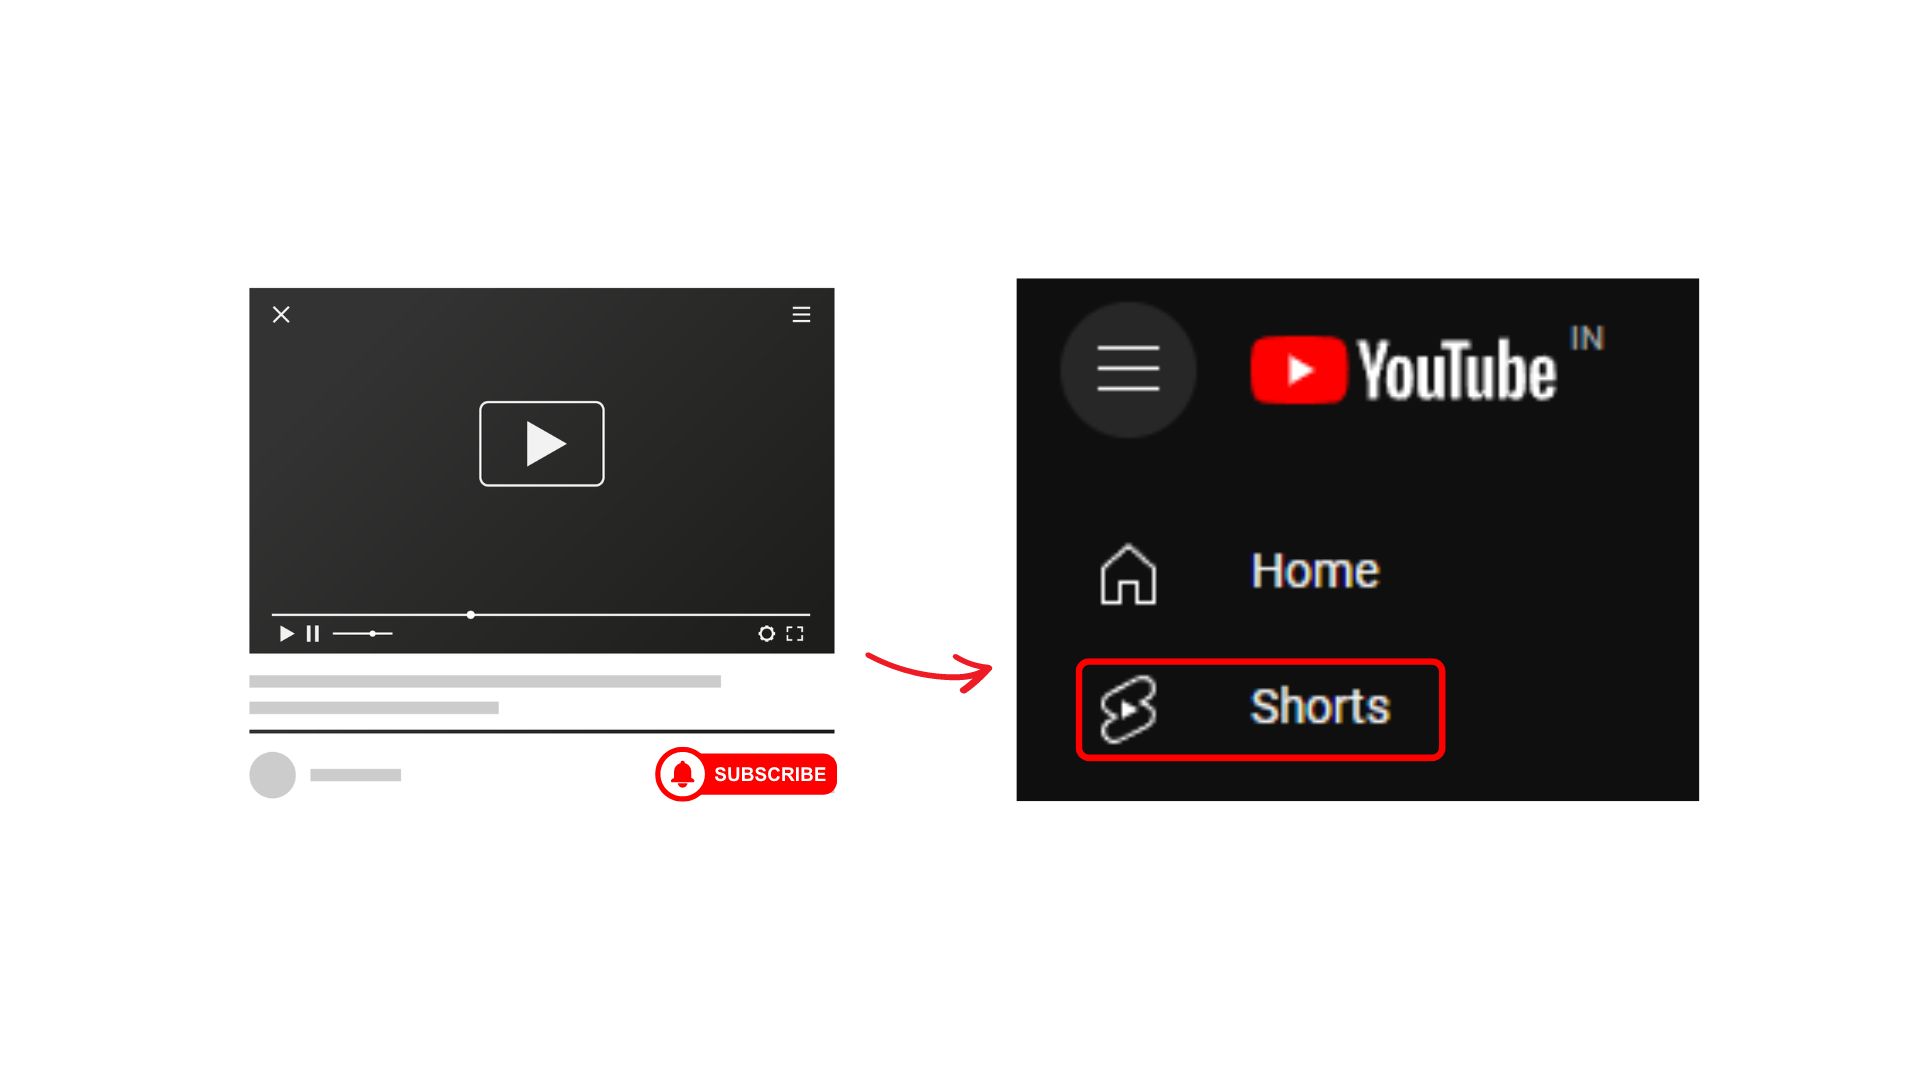 Turn YouTube video into shorts